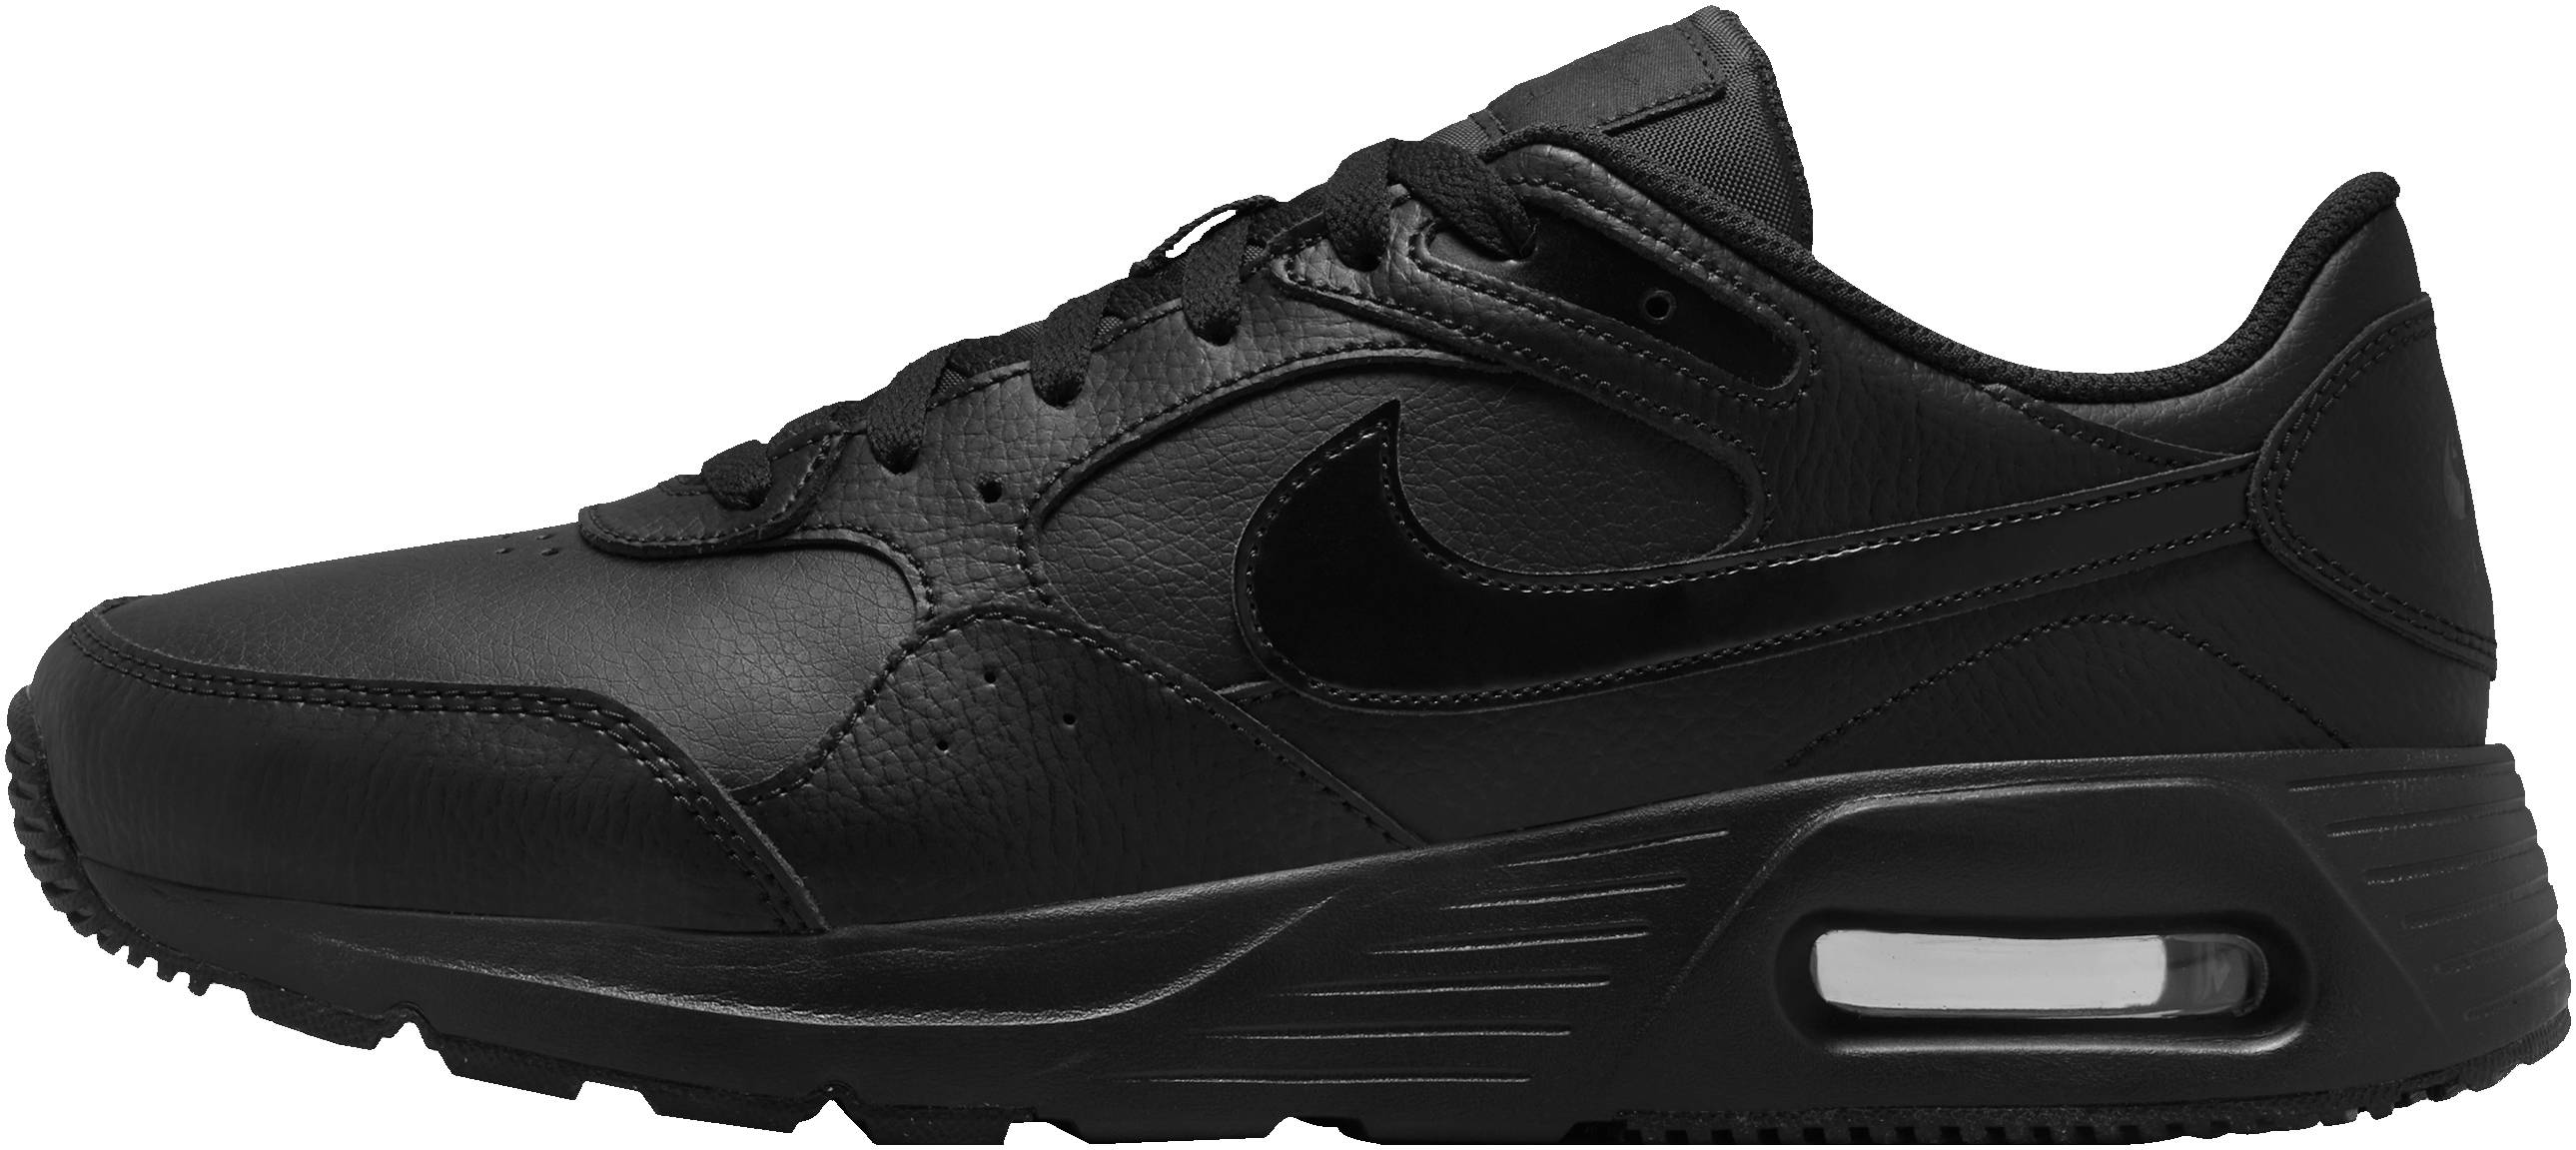 Nike Air Max SC Leather Review, Facts, Comparison |